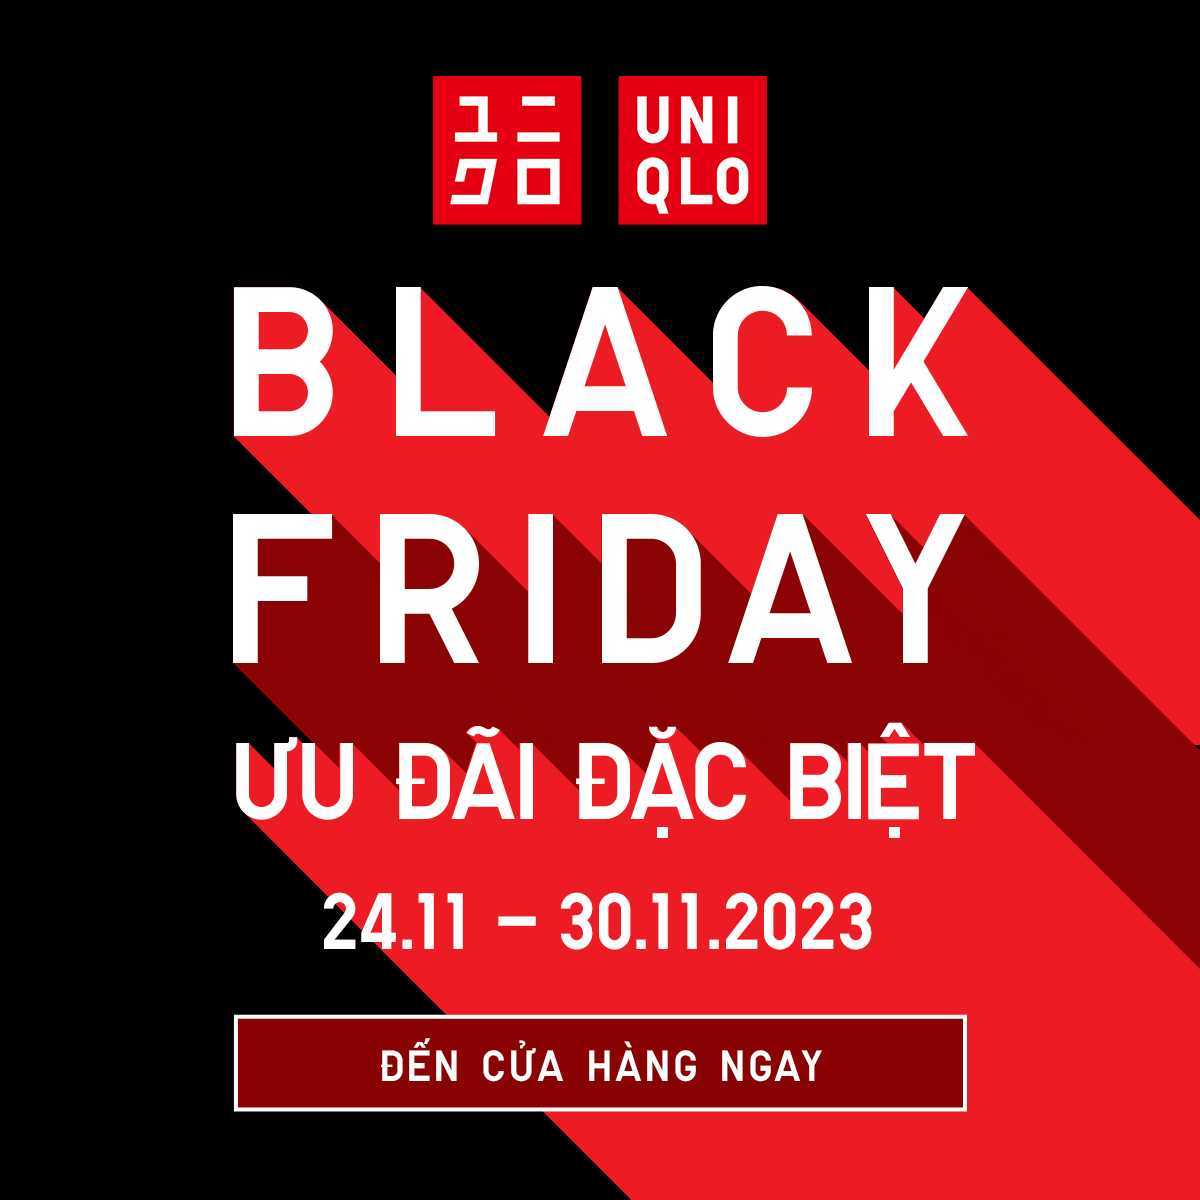 BLACK FRIDAY - LIMITED OFFERS AT UNIQLO